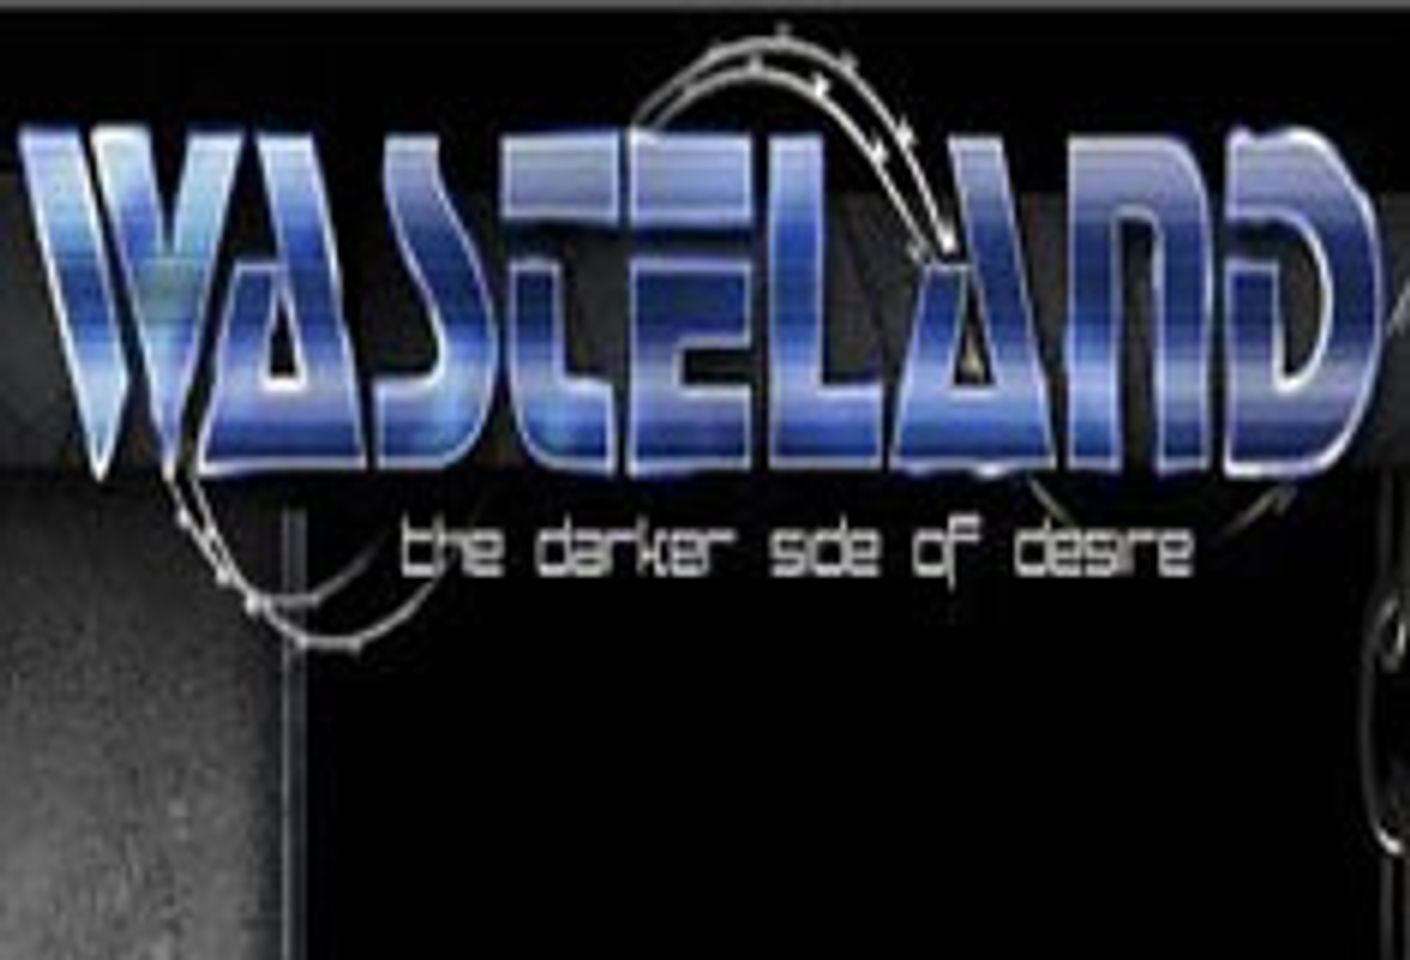 Wasteland.com To Introduce Serial Feature Onsite